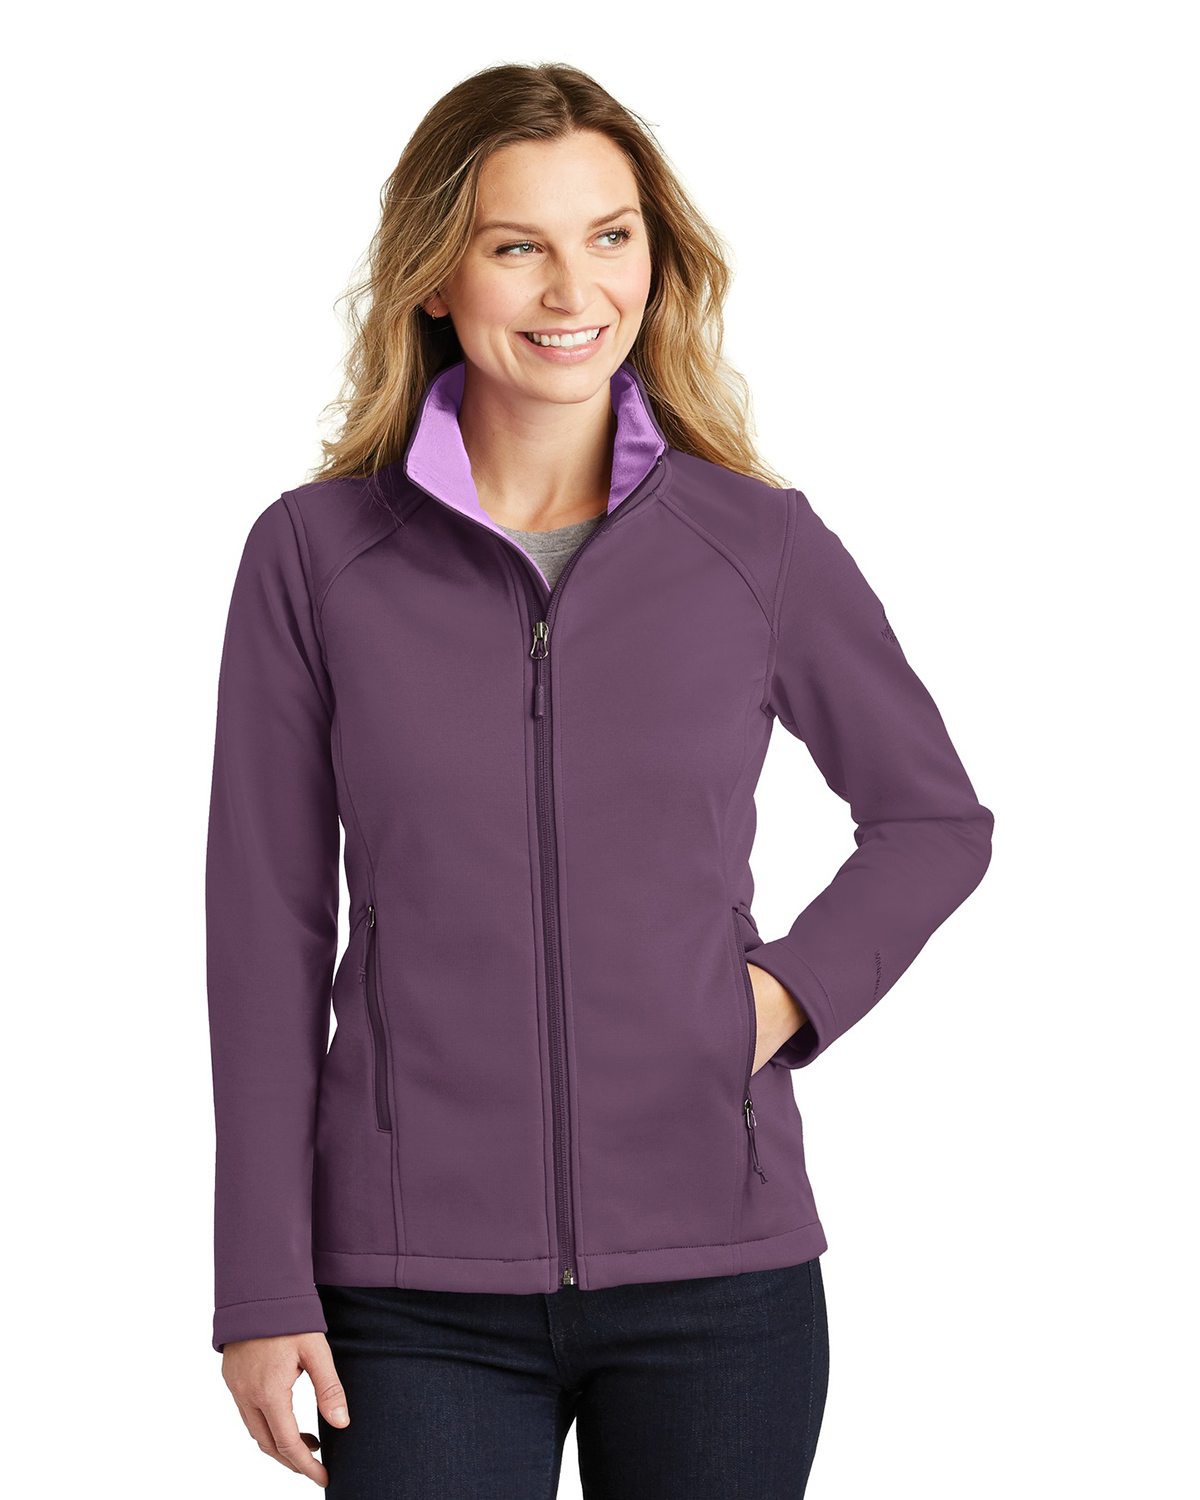 'The North Face NF0A3LGY Ladies Ridgeline Soft Shell Jacket'